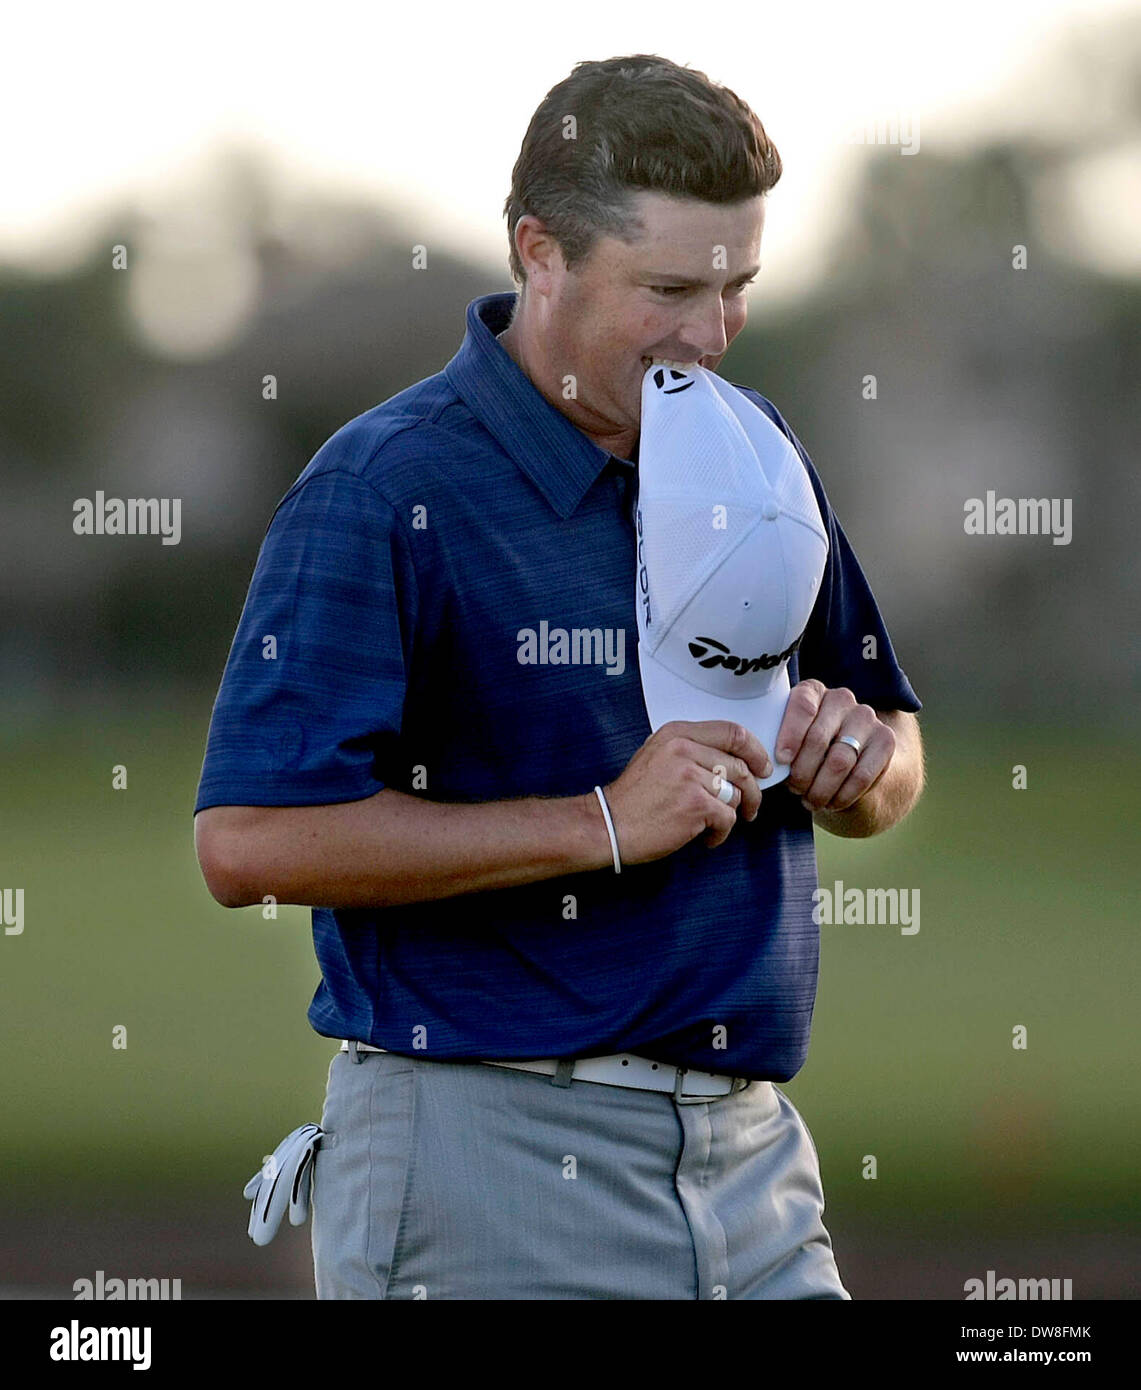 Palm Beach Gardens, Florida, USA. 2nd Mar, 2014. Ryan Palmer bites his cap after missing what would have been the winning putt at the 18th green during the final round of the 2014 Honda Classic Sunday, Mar 2, 2014 at PGA National in Palm Beach Gardens. Palmer went on to play in a four player playoff won by Russell Henley. © Bill Ingram/The Palm Beach Post/ZUMAPRESS.com/Alamy Live News Stock Photo